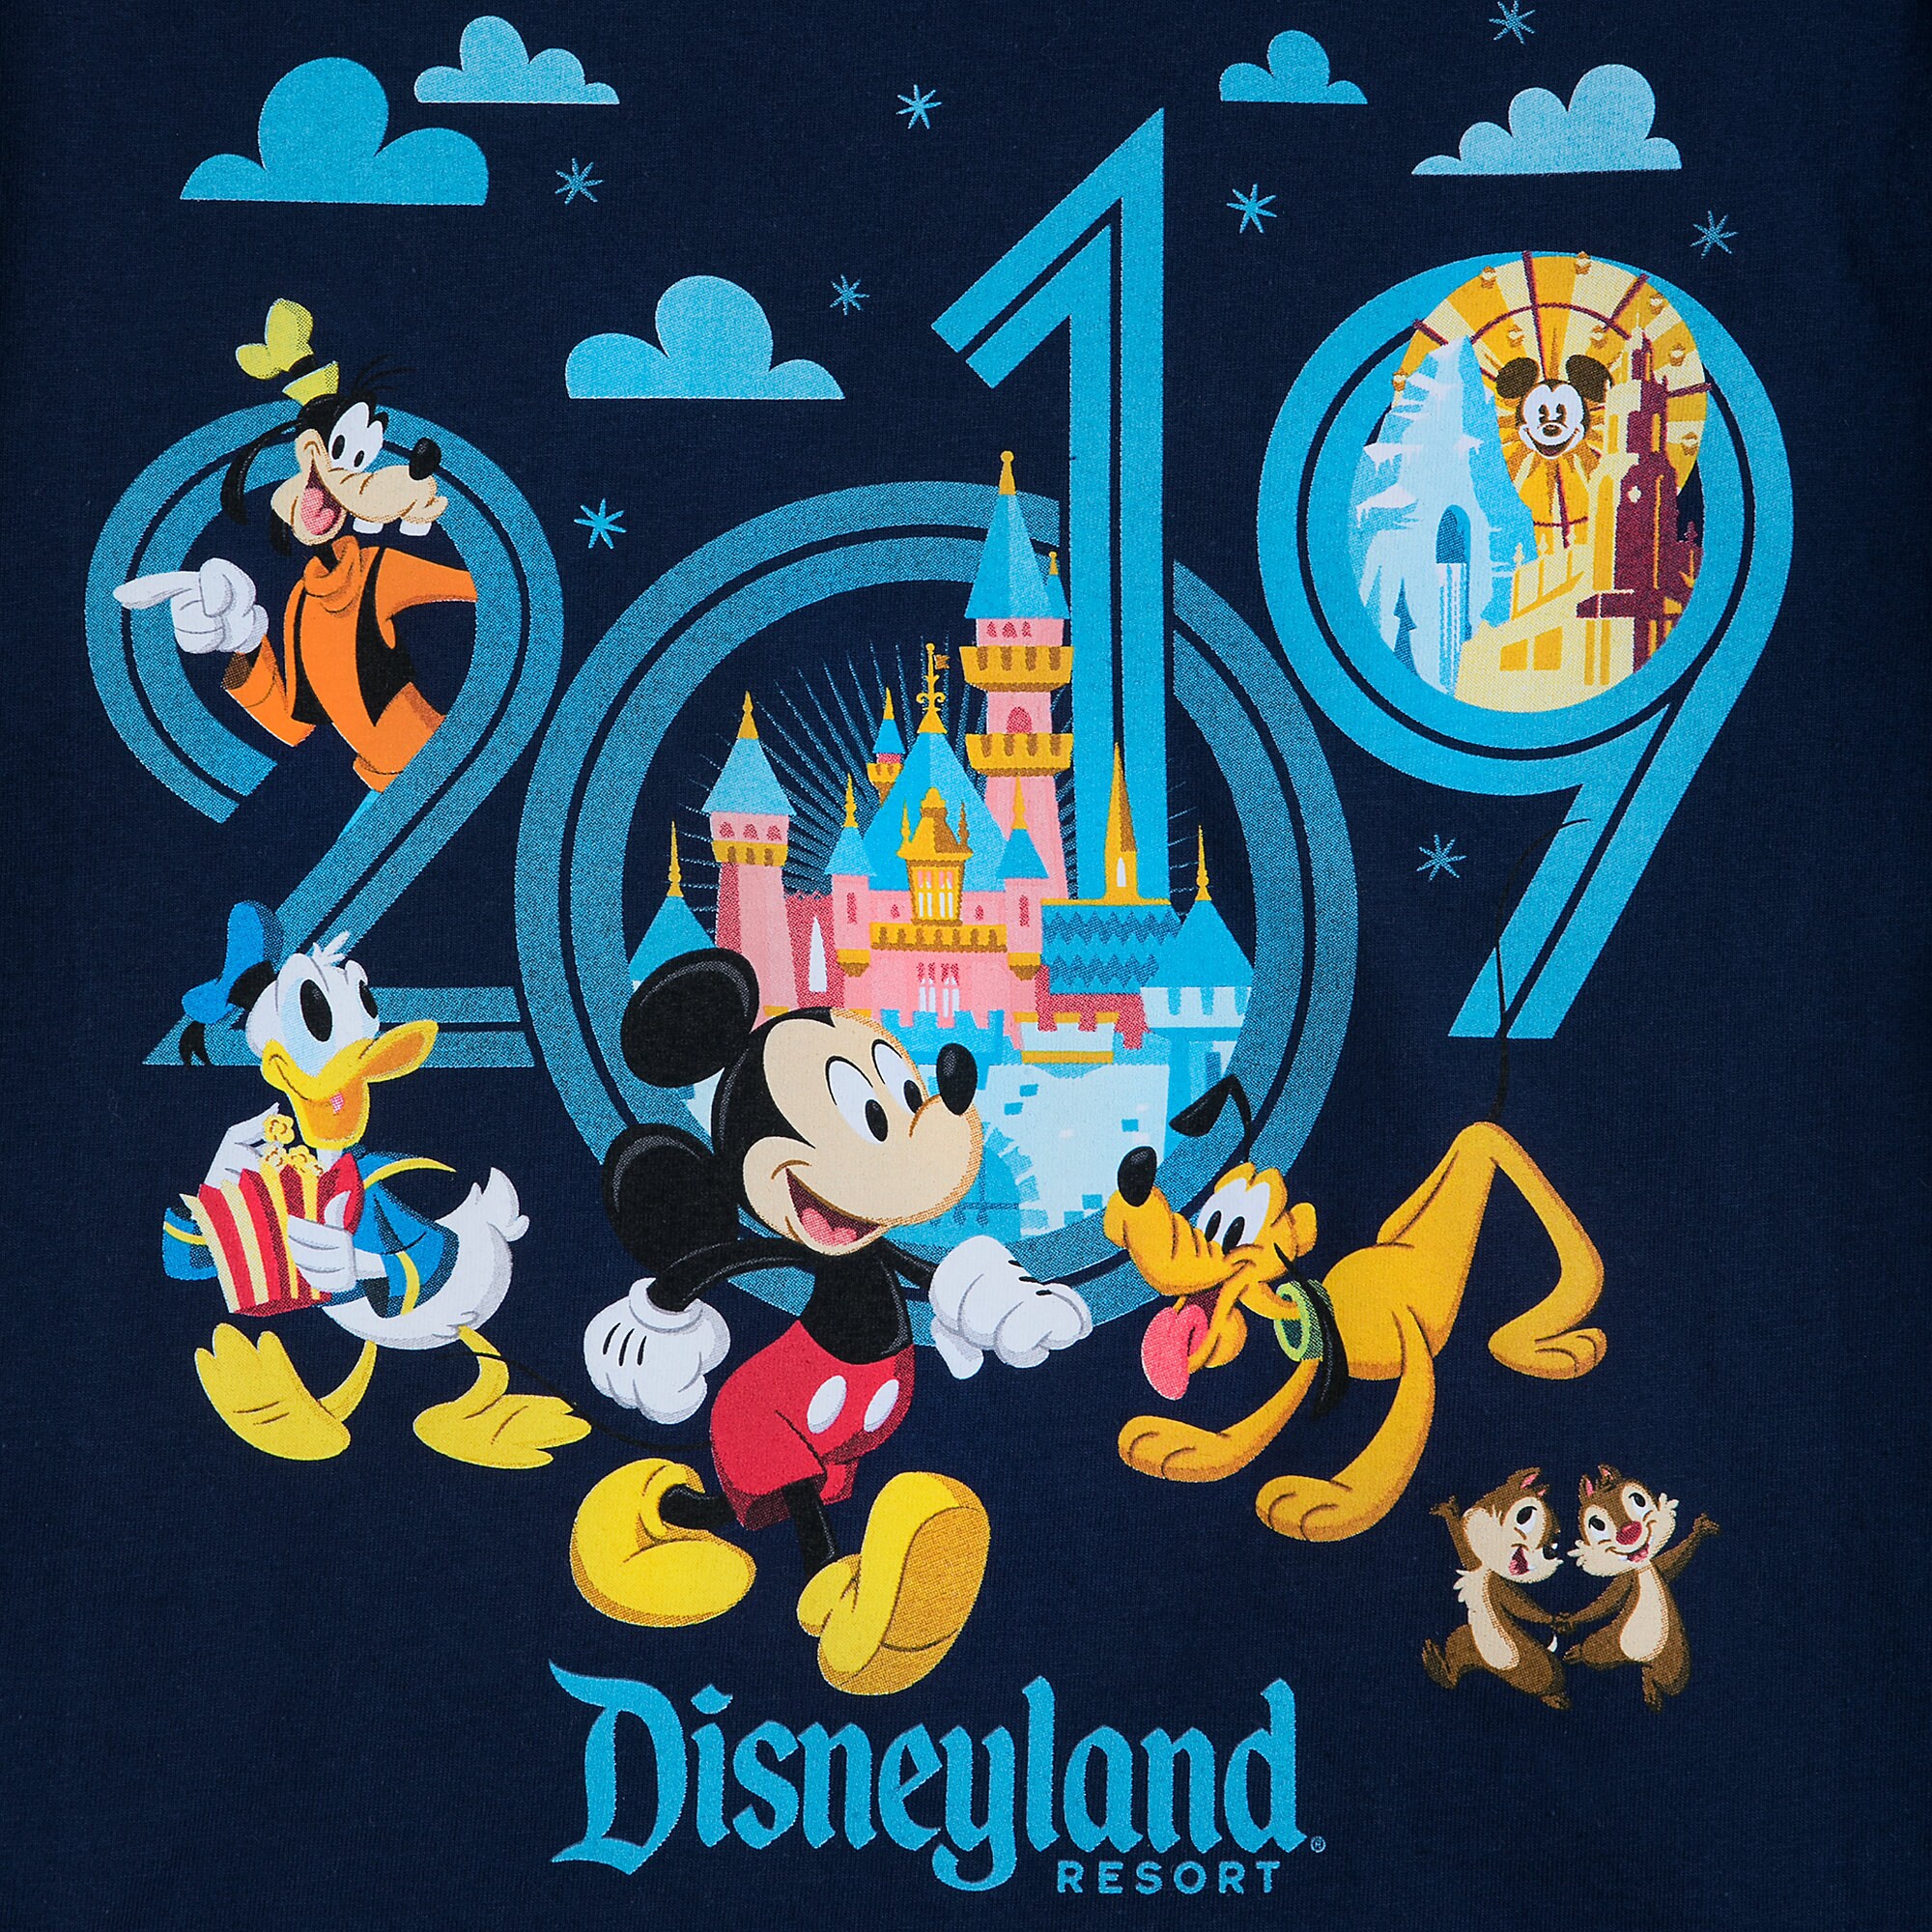 Mickey Mouse and Friends T-Shirt for Kids - Disneyland 2019